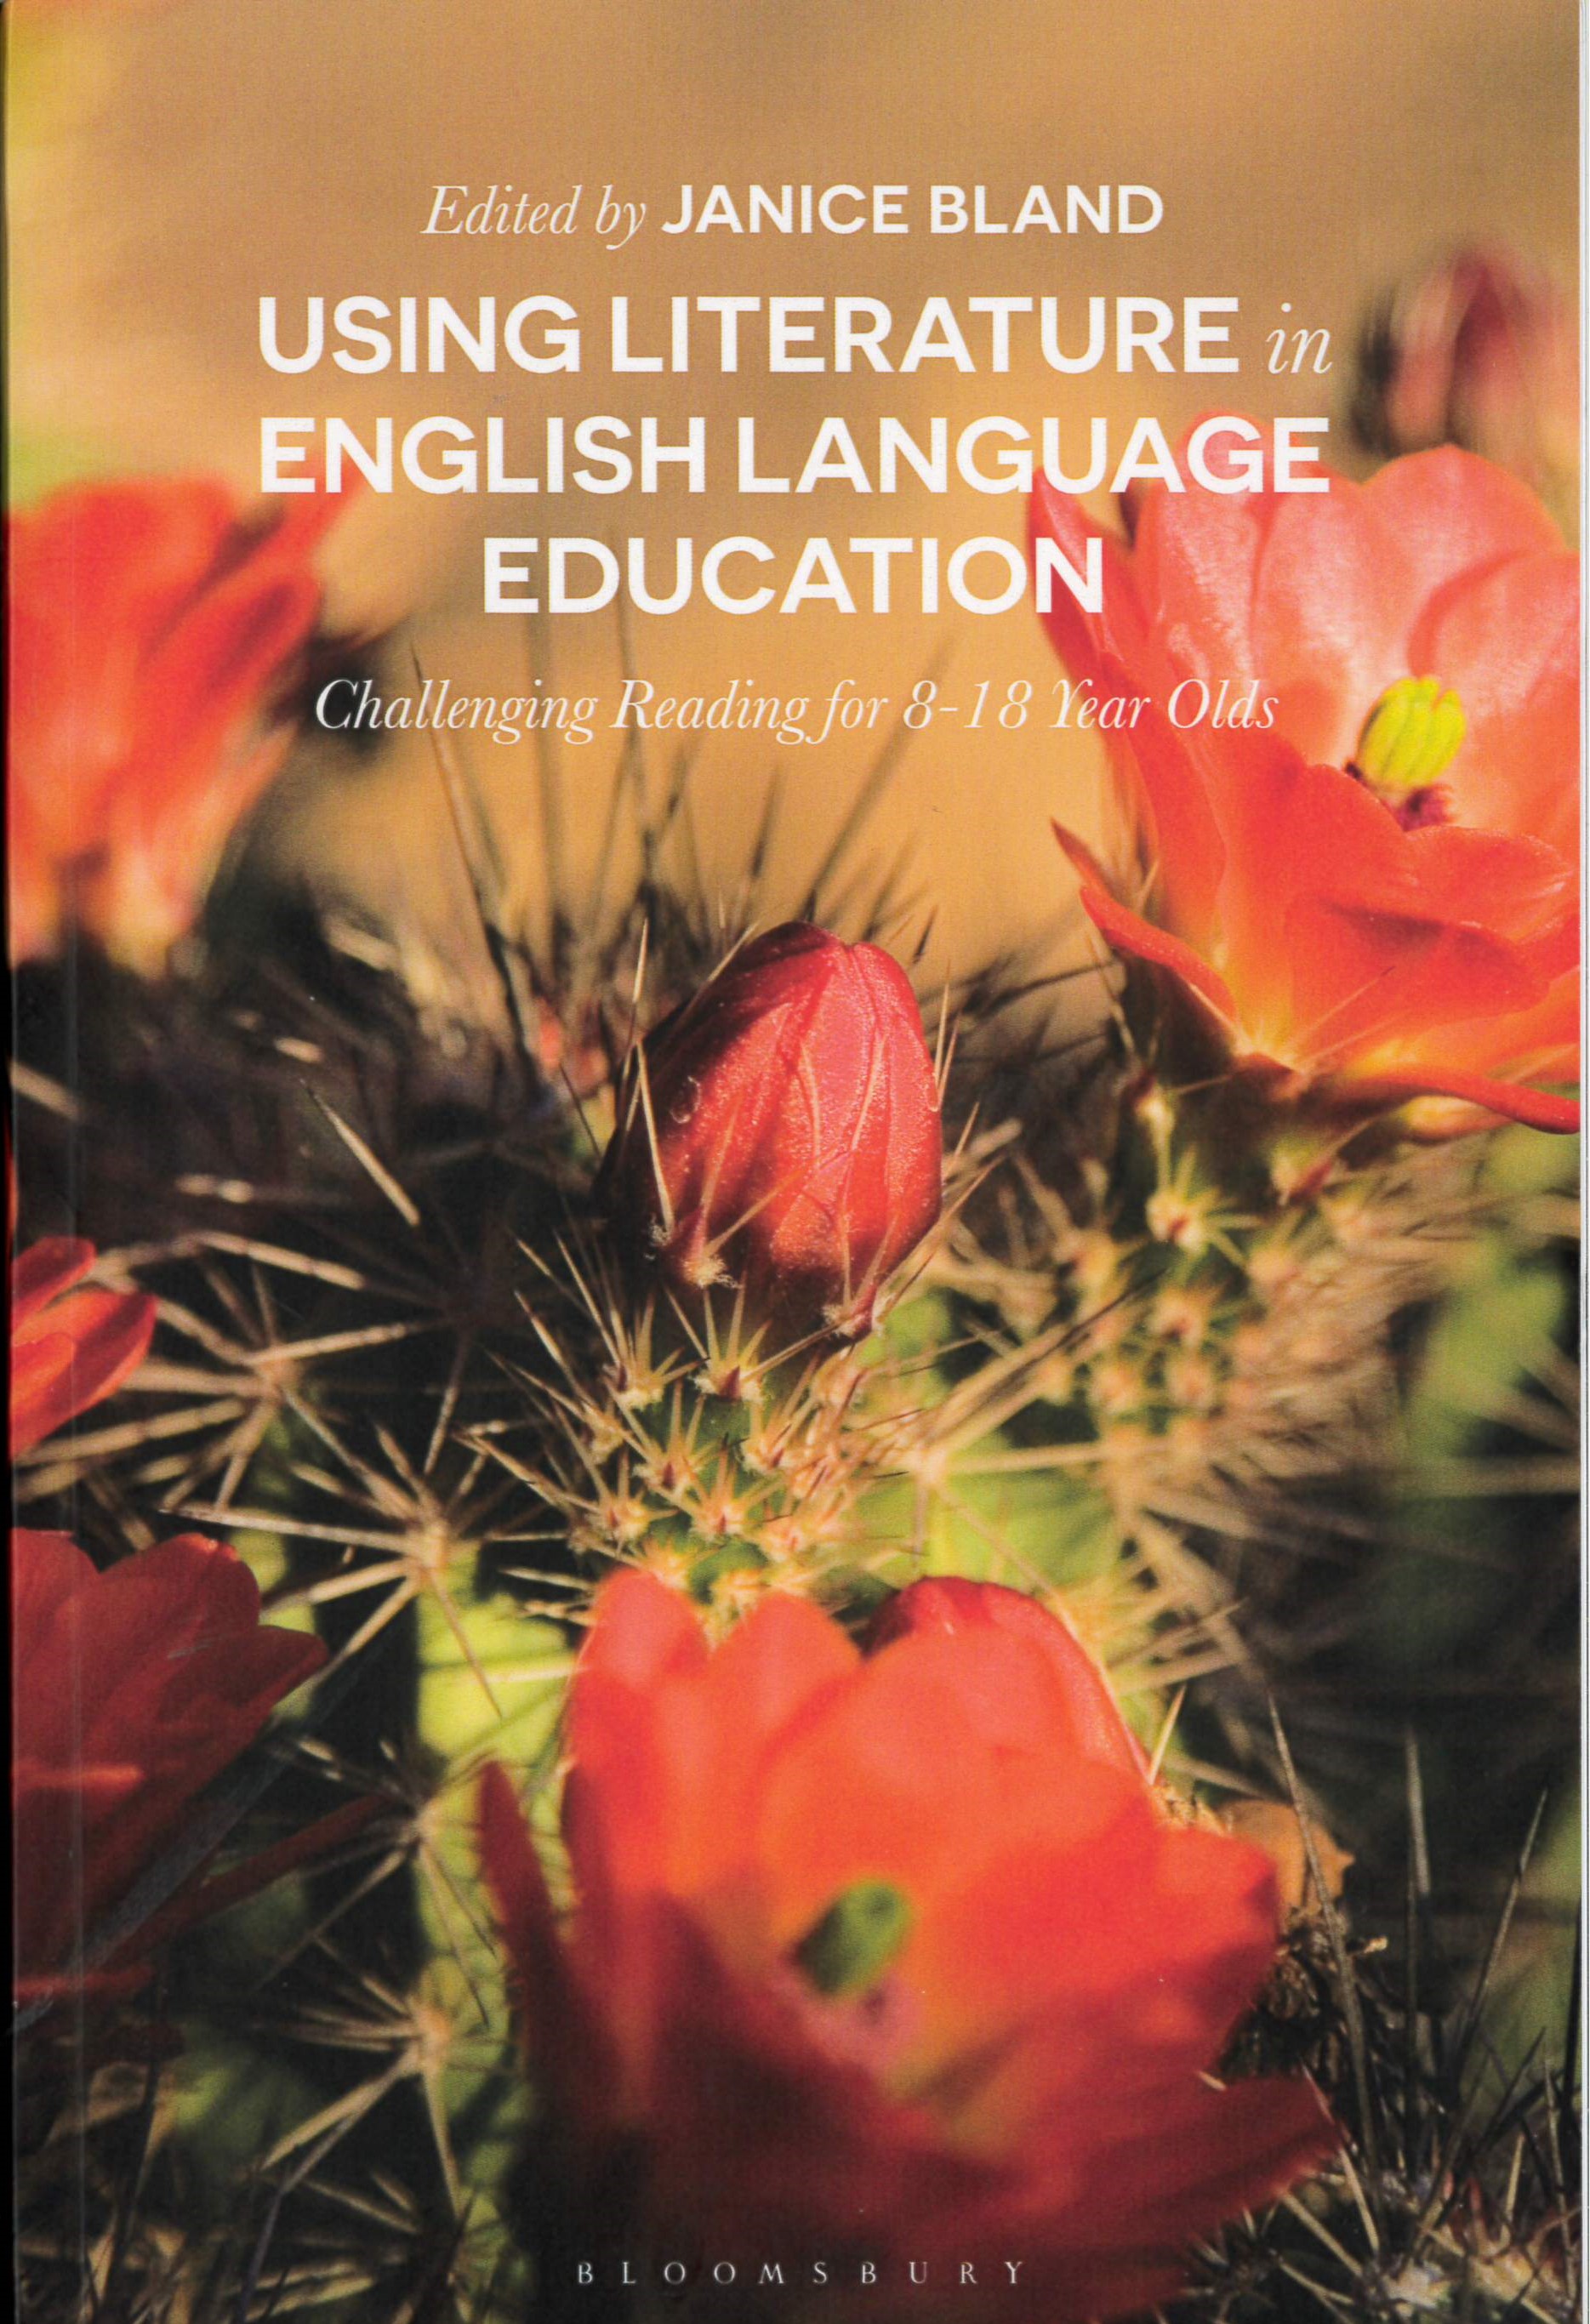 Using literature in English language education : challenging reading for 8-18 year olds /